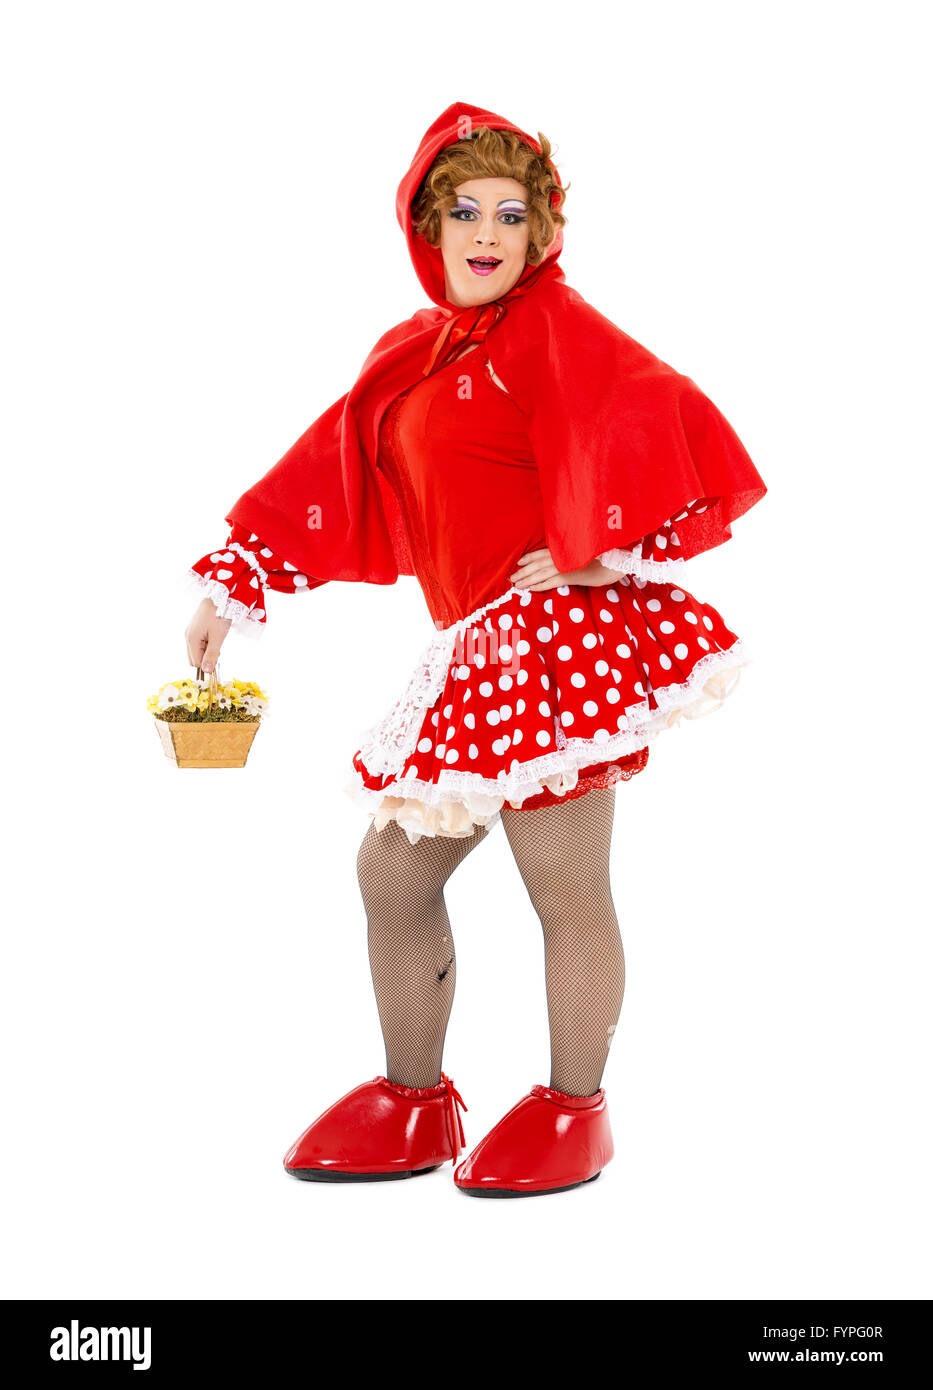 Actor Drag Queen Dressed as Little Red Riding Hood Stock Photo